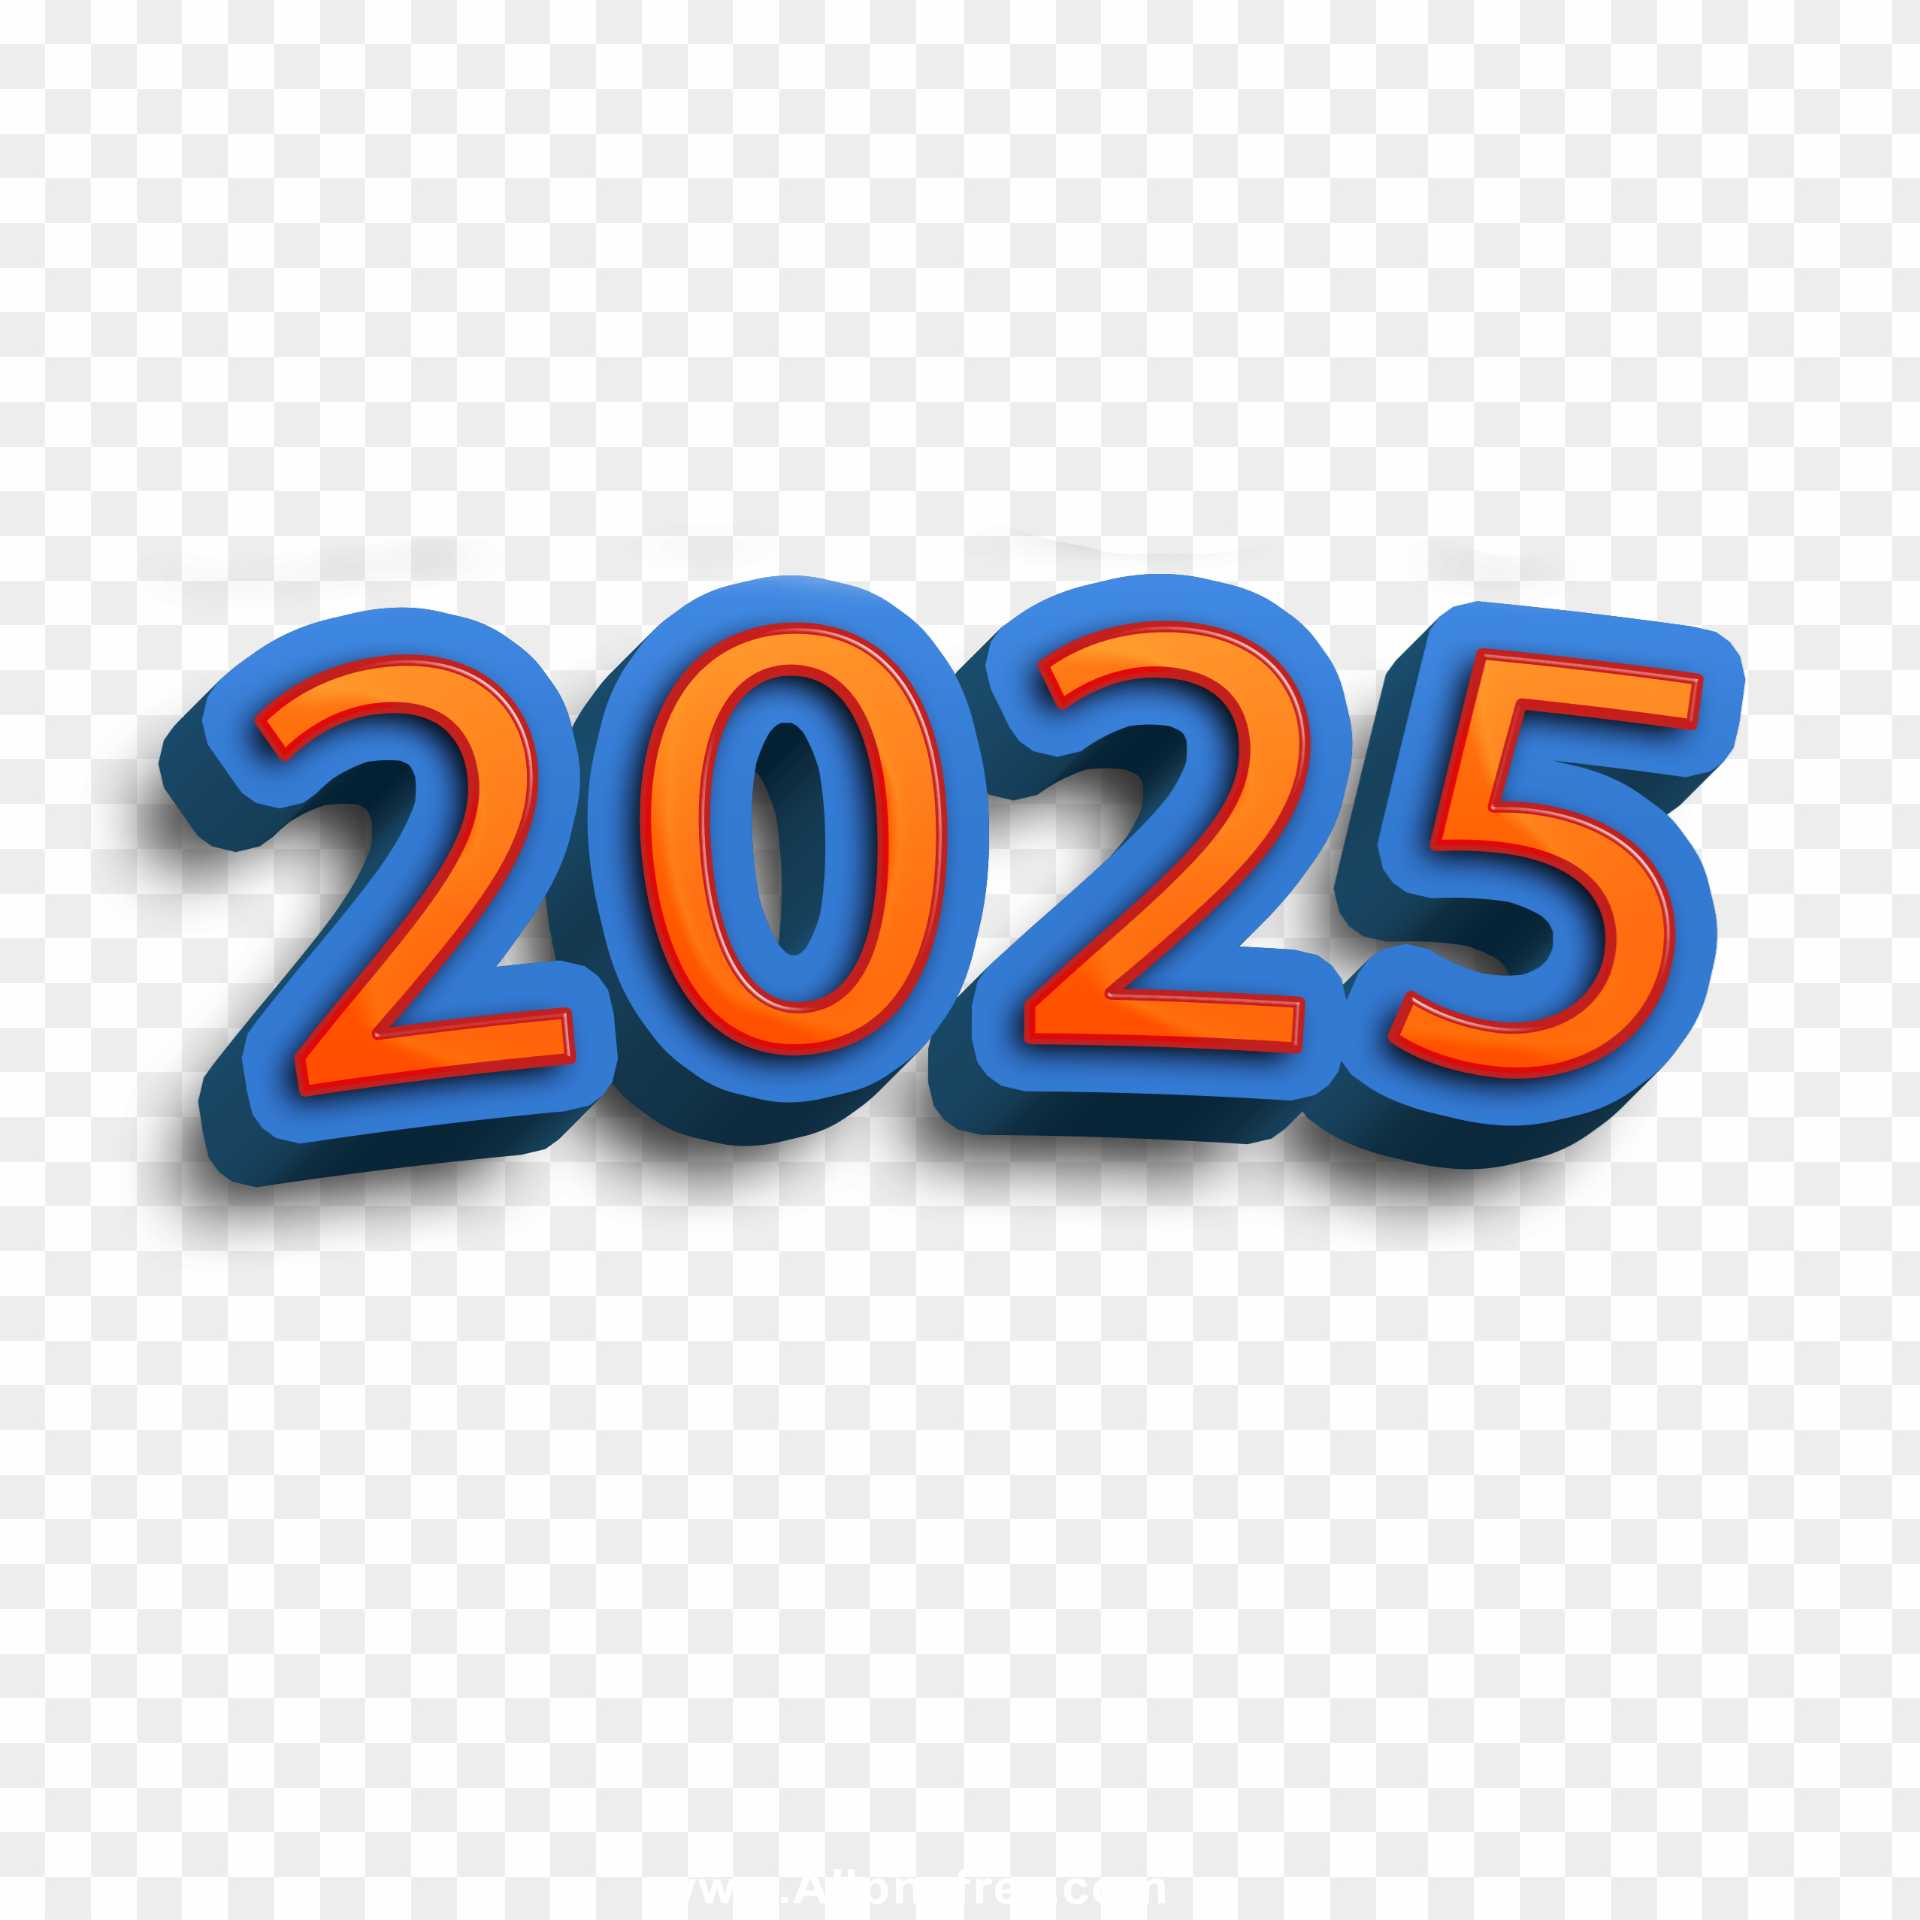 calling-planet-earth-2025